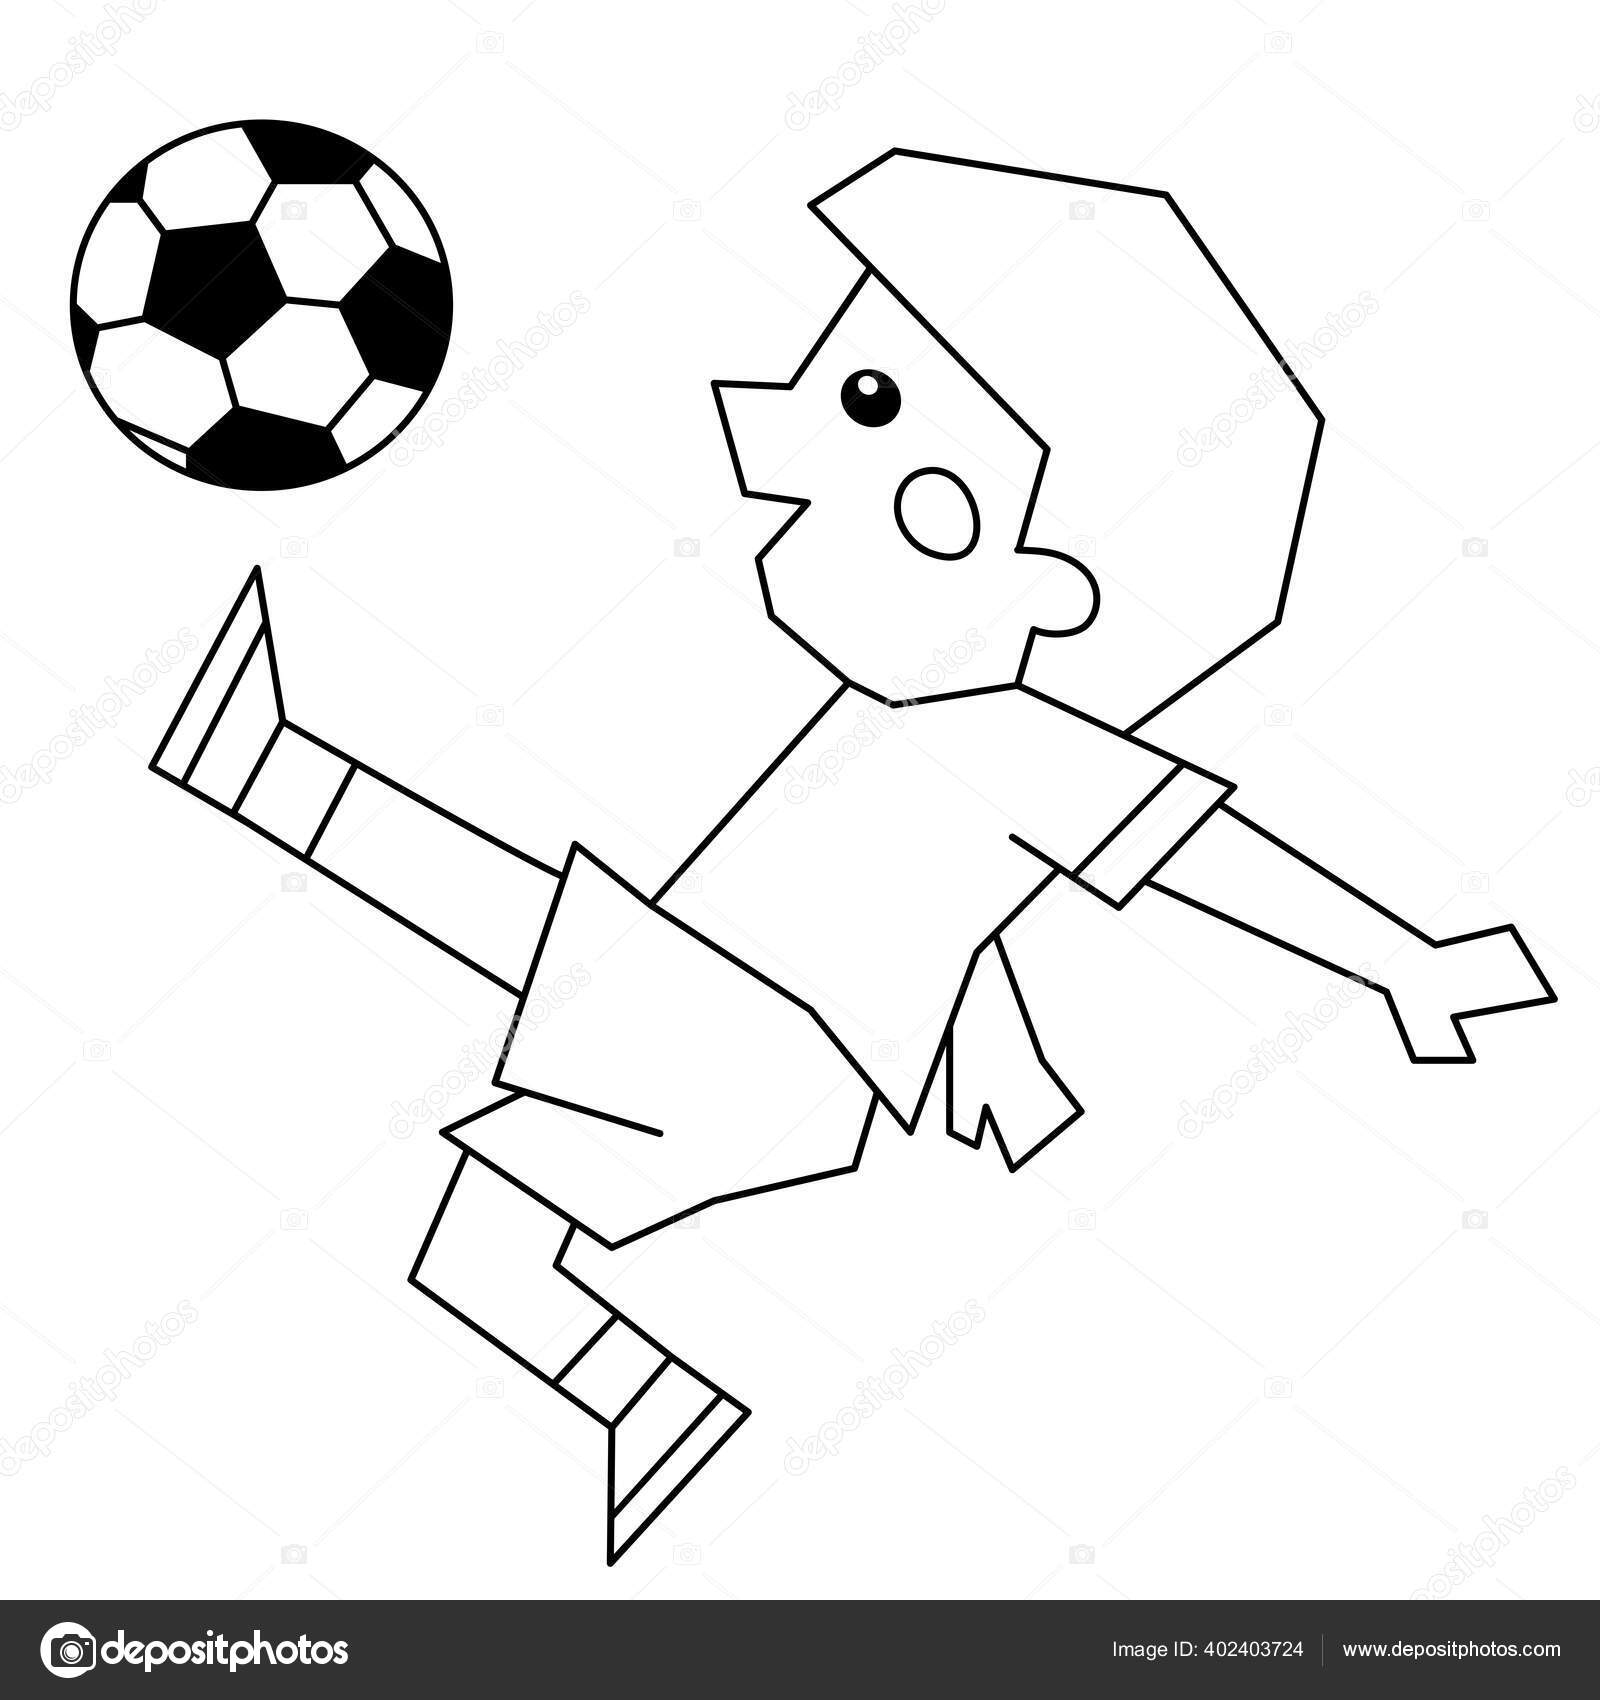 Coloring page outline cartoon boy soccer ball coloring book kids stock vector by oleon